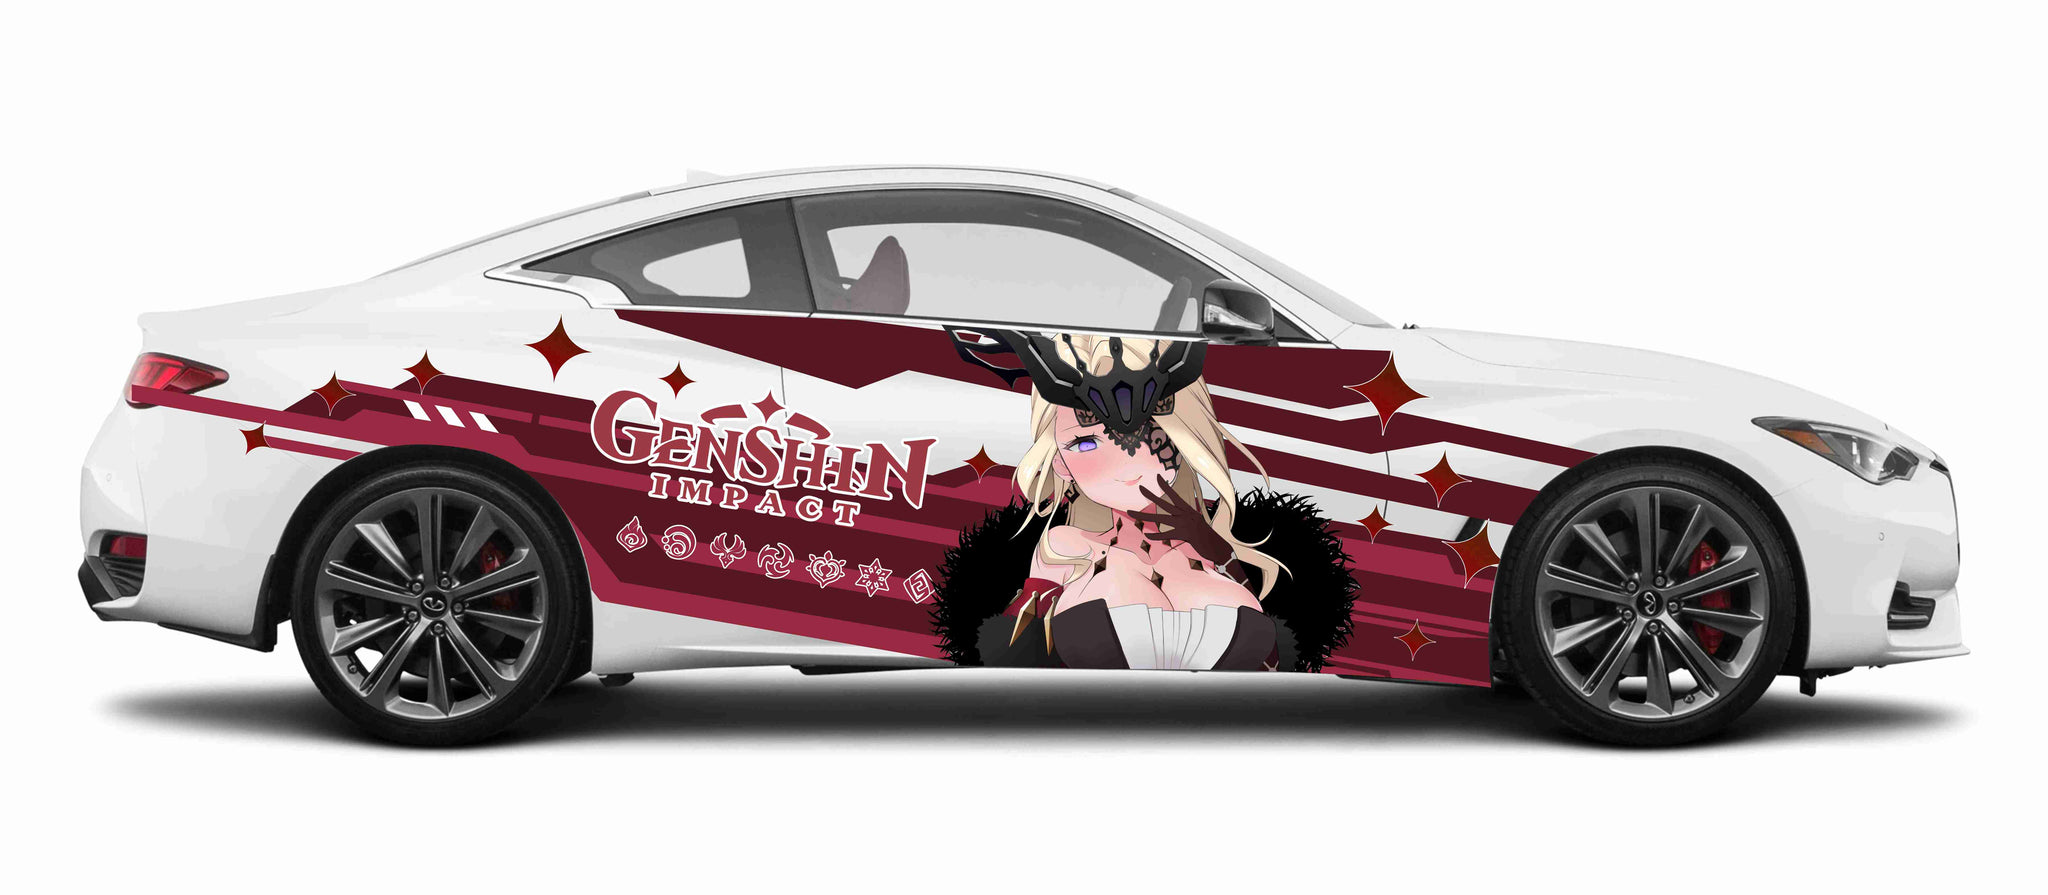 Anime ITASHA Japanese Girl Car Wrap Door Side Stickers Decal Fit